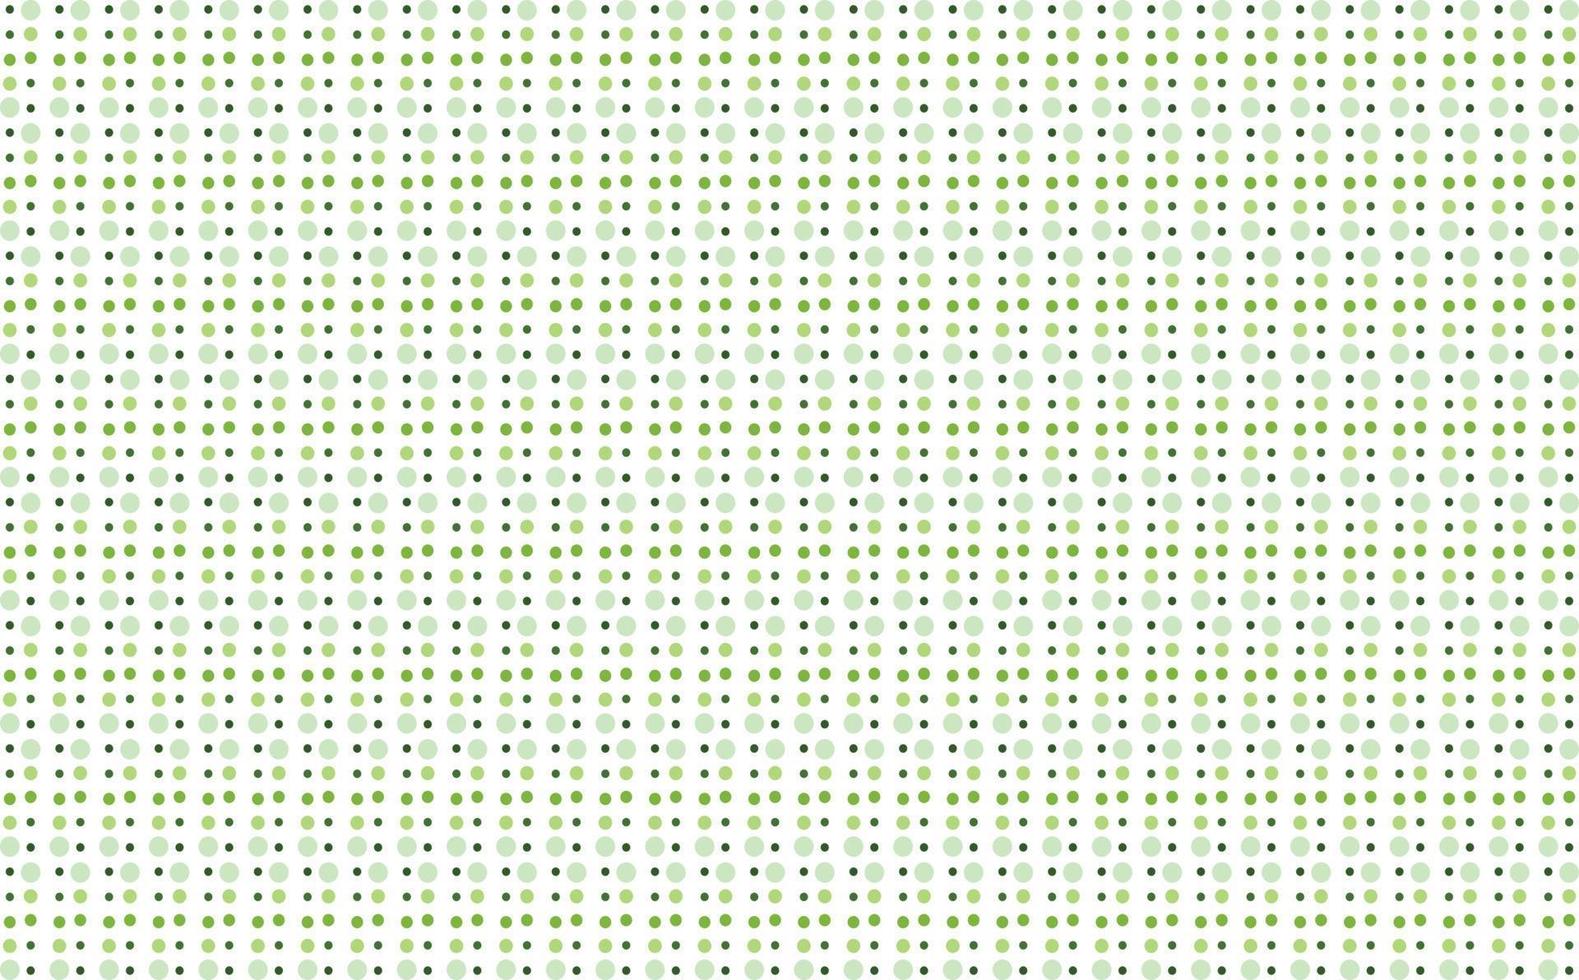 Green dots abstract pattern. Suitable for wallpaper, cover, card, banner, and fill background. vector